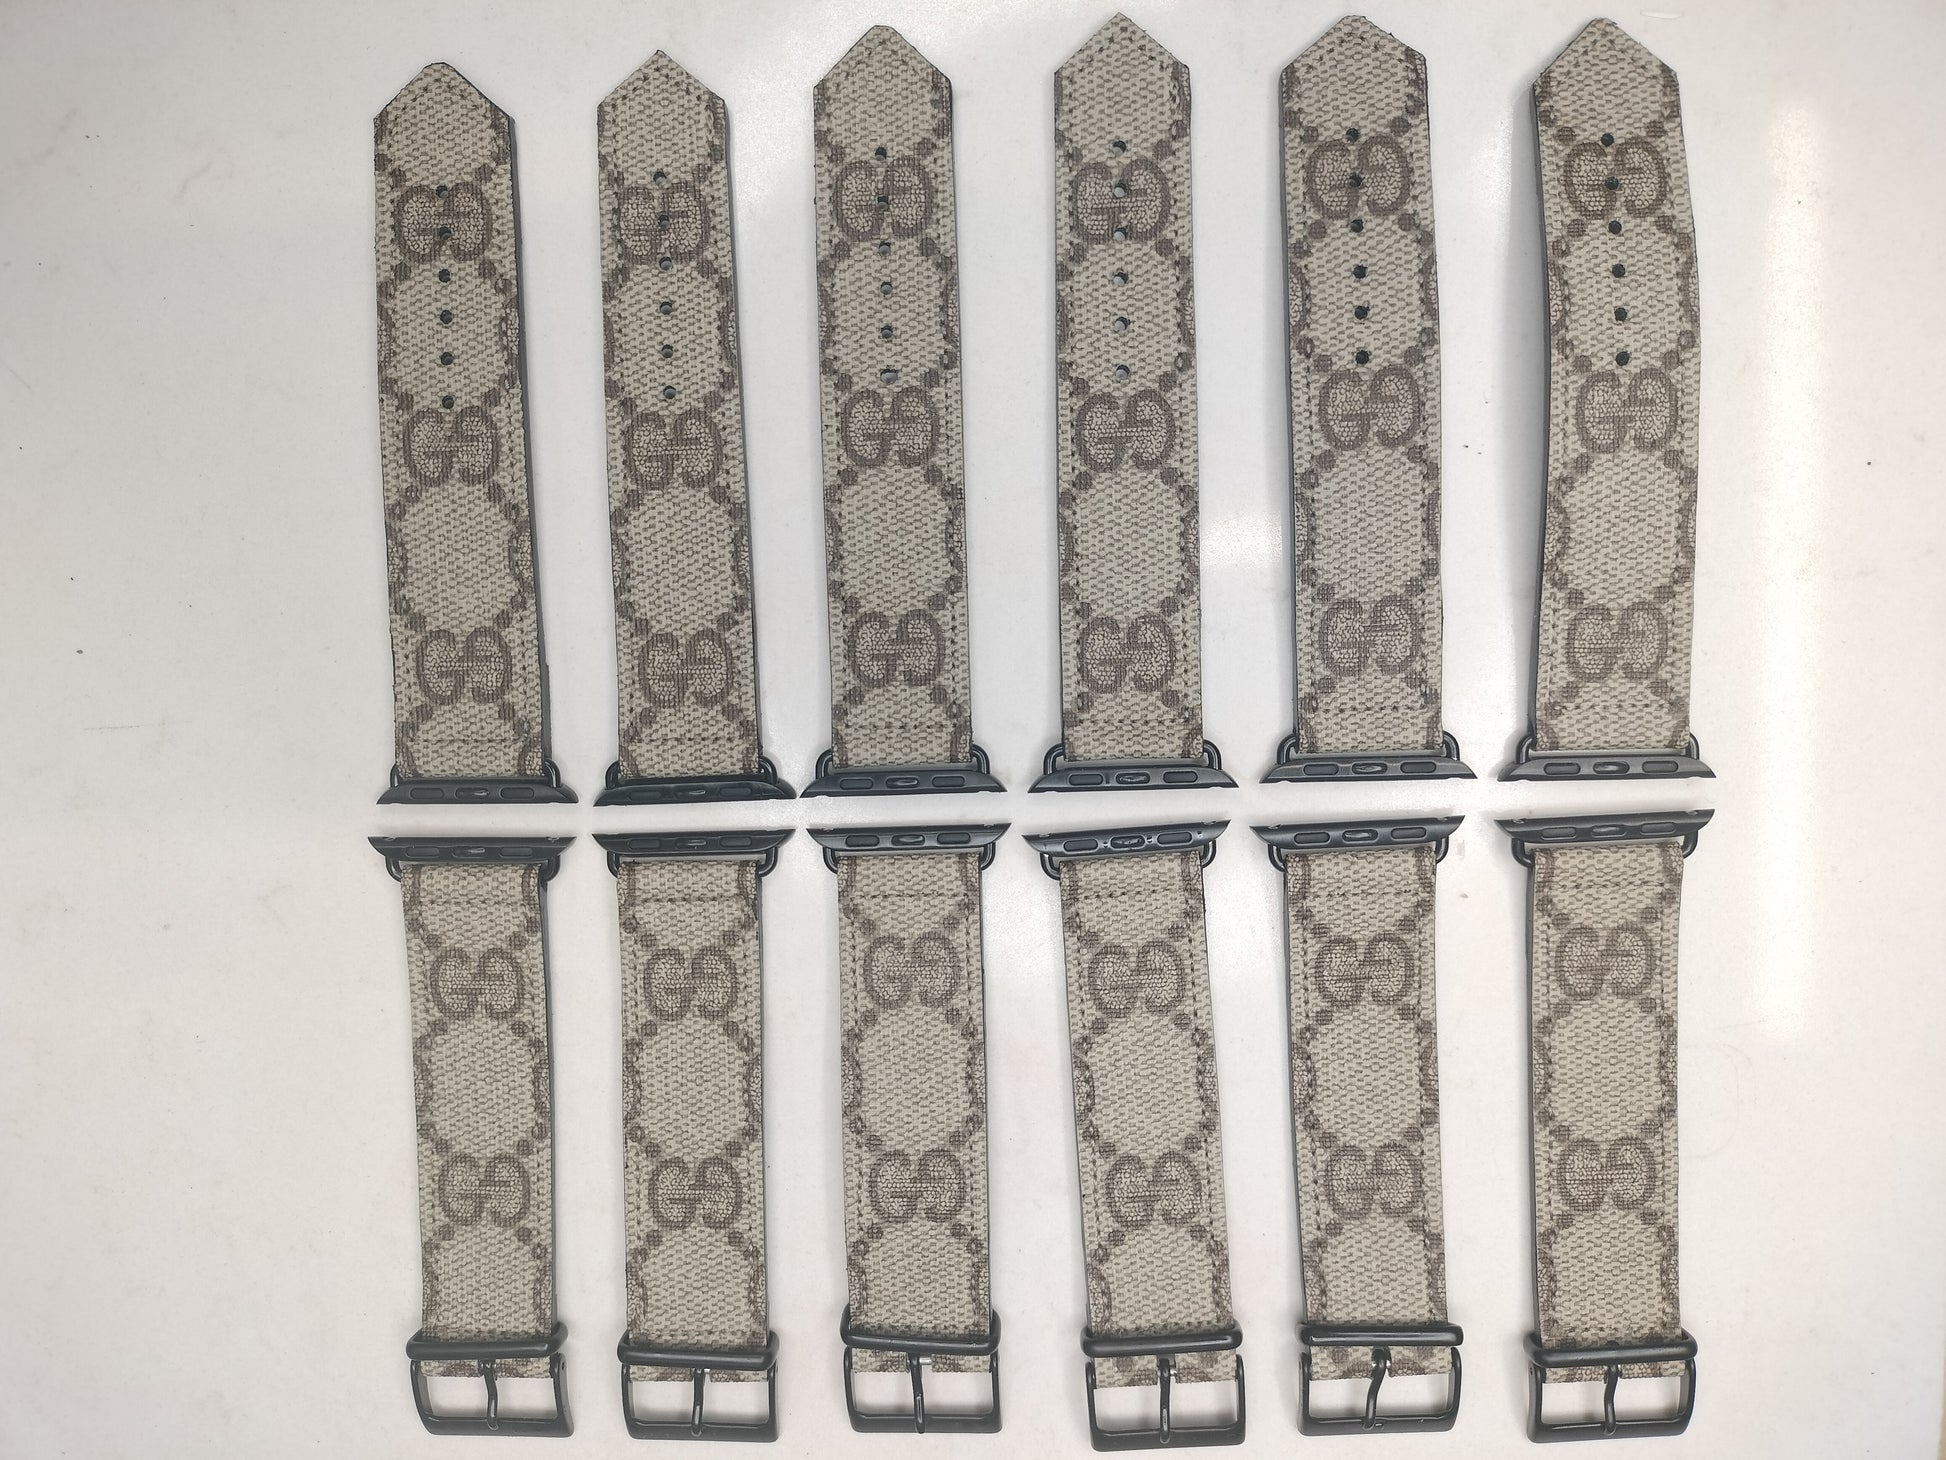 Gucci Upcycled Apple Watch Straps